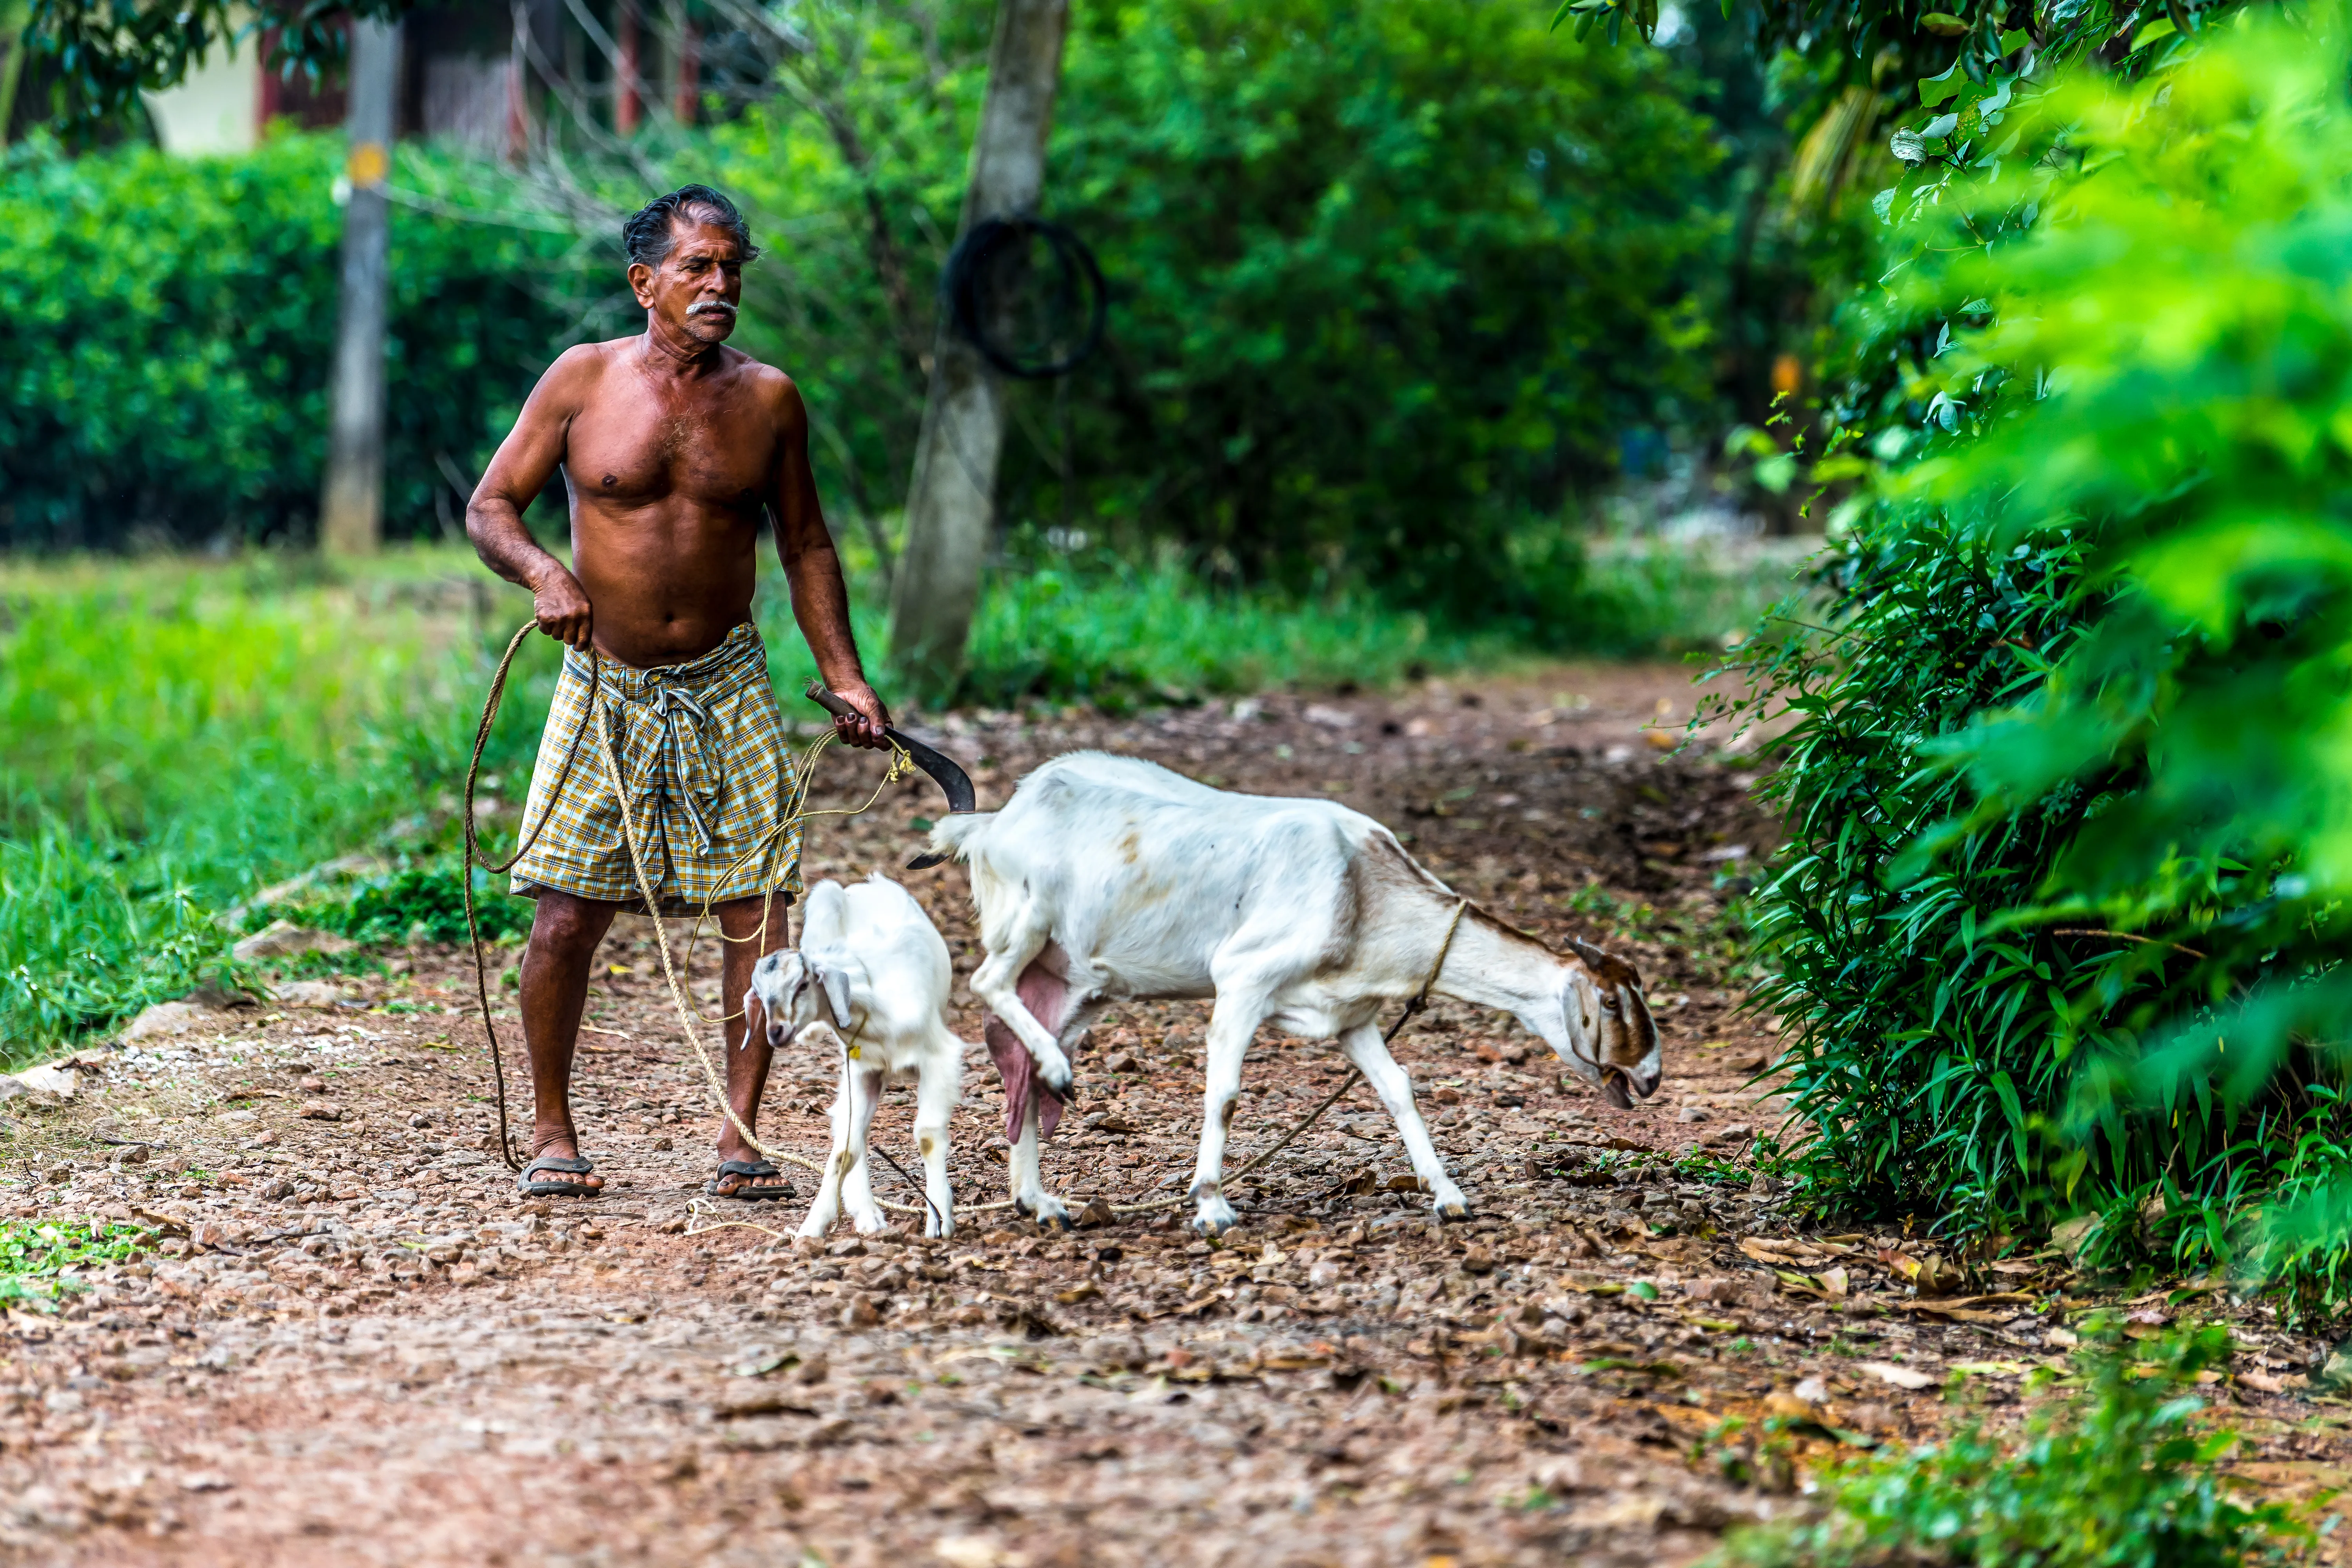 A man tends to his goats in a village in Kerala, India.?w=200&h=150